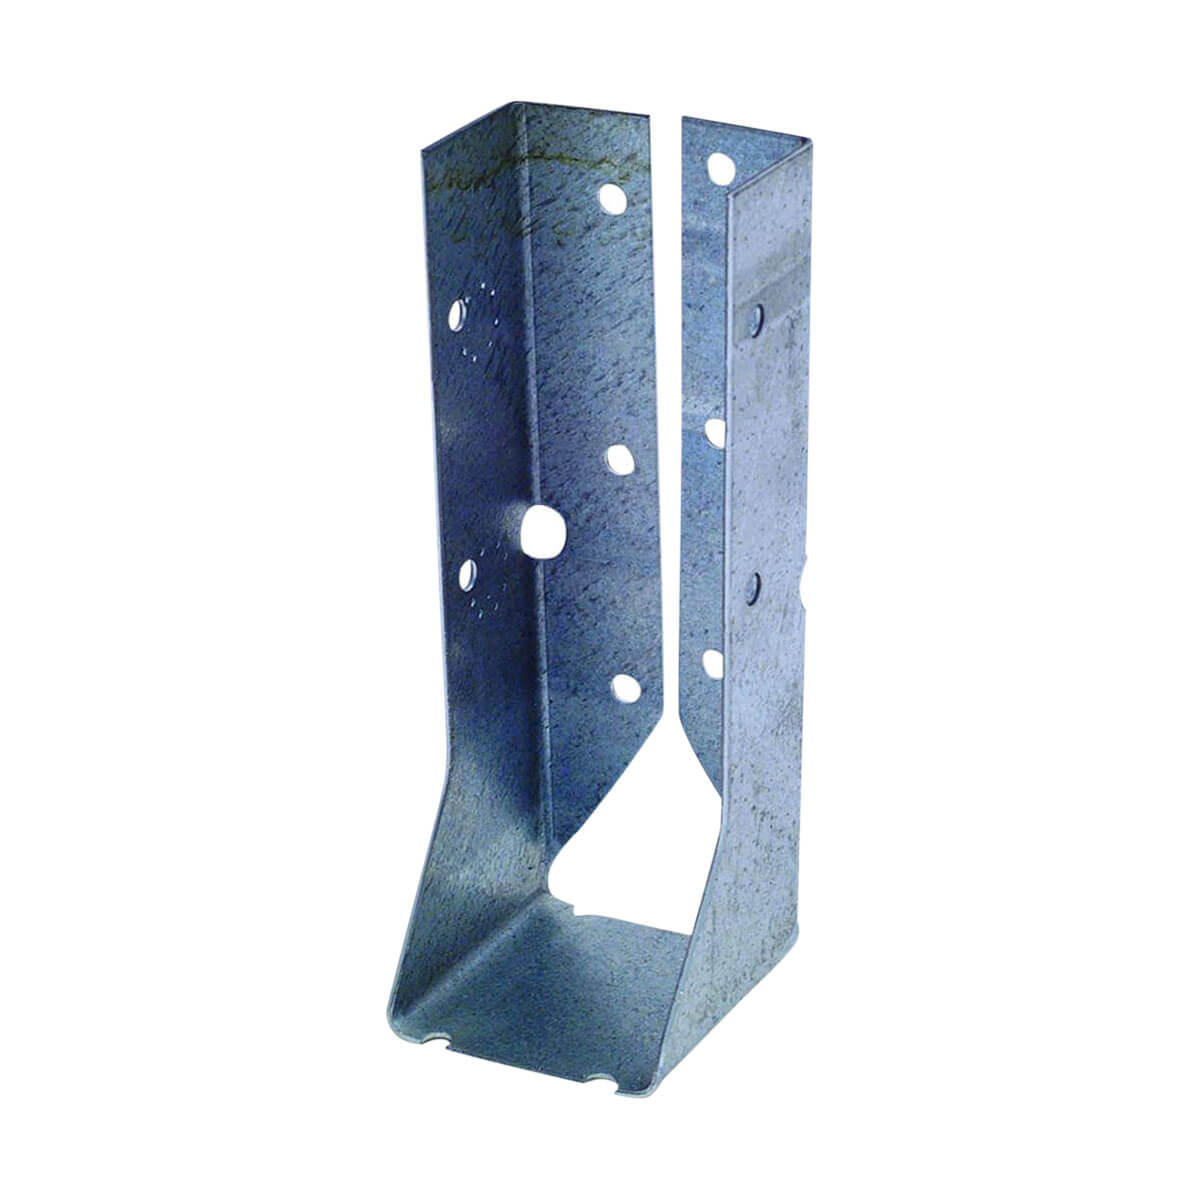 Z-MAX Galvanized Concealed Face Mount Joist Hangers - 2-in x 6-in